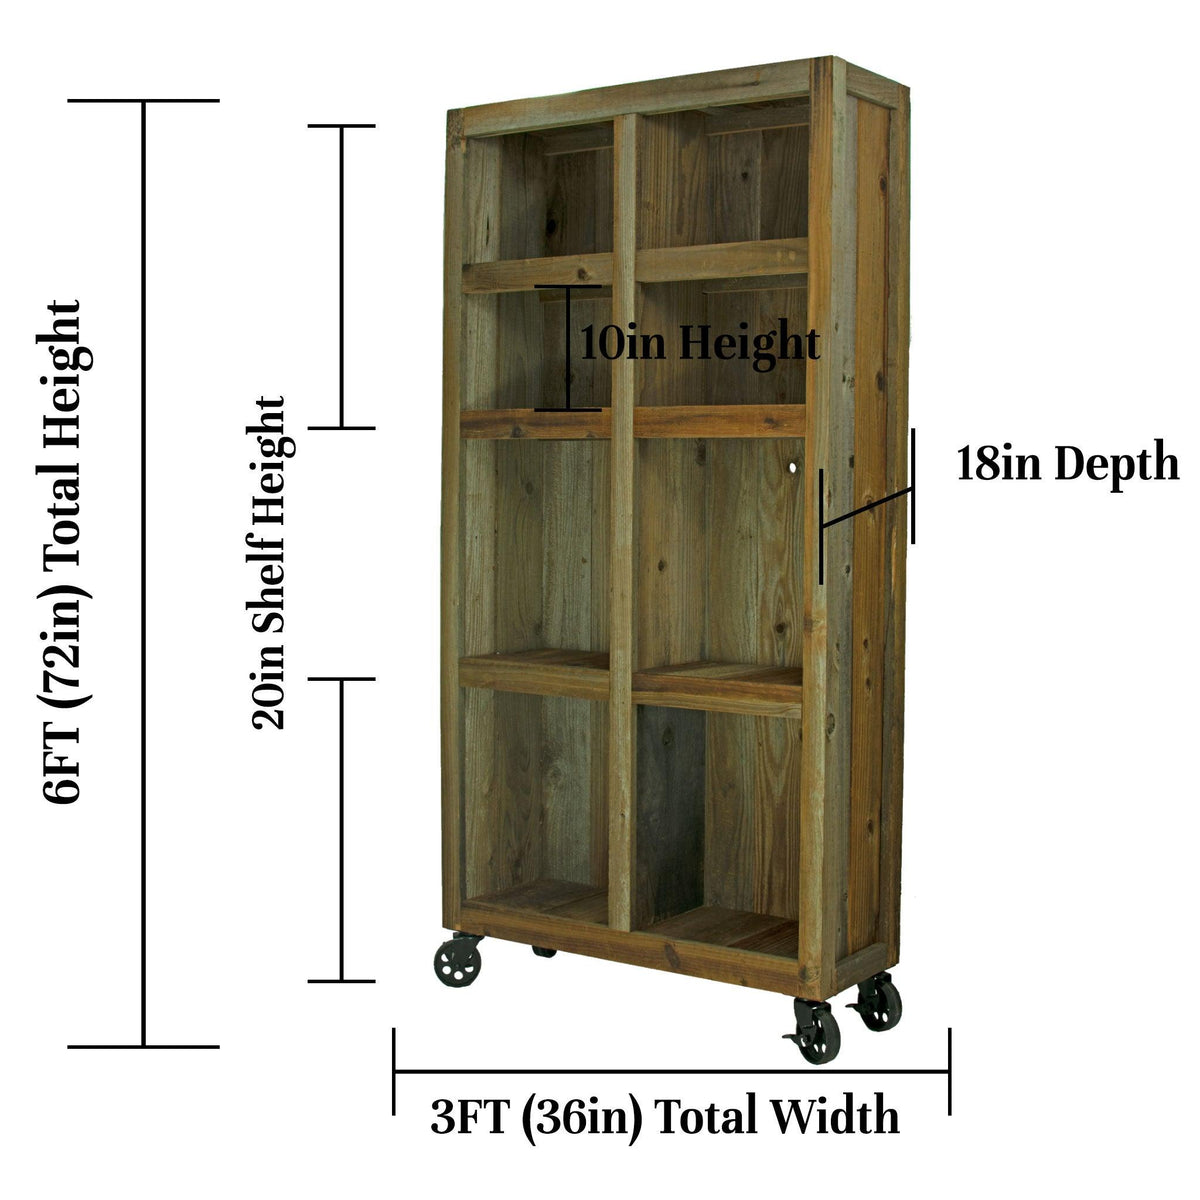 Dimensions of Lee Display's brand new Outdoor Rolling Redwood Storage Cabinet with Wheels.  Shelving Unit with 5in Black Casters on sale at leedisplay.com